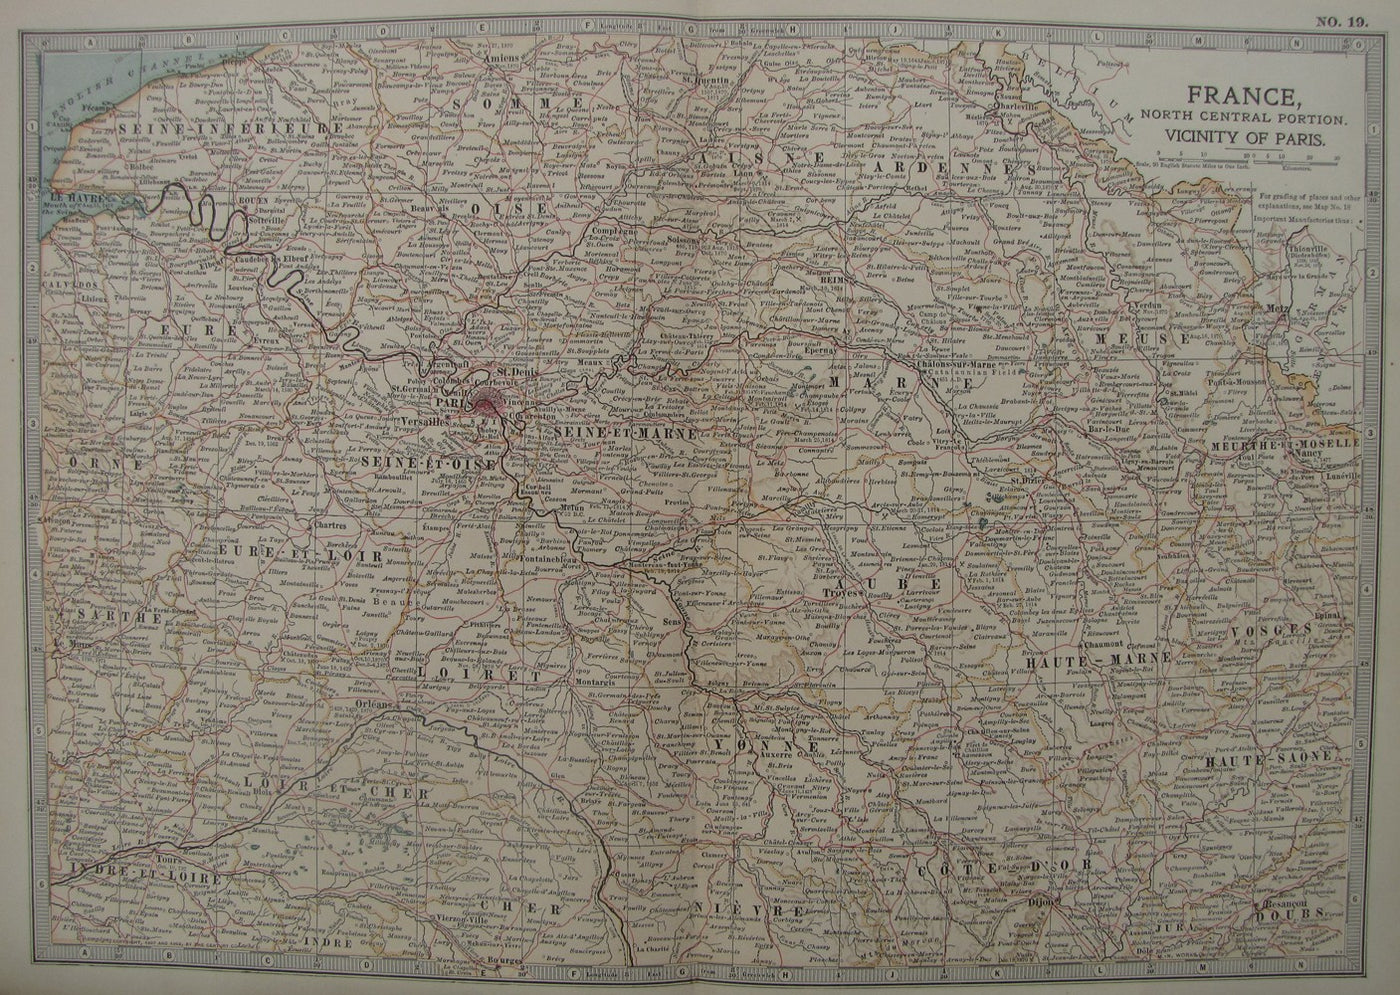 France, North Central Portion. Vicinity of Paris, antique map